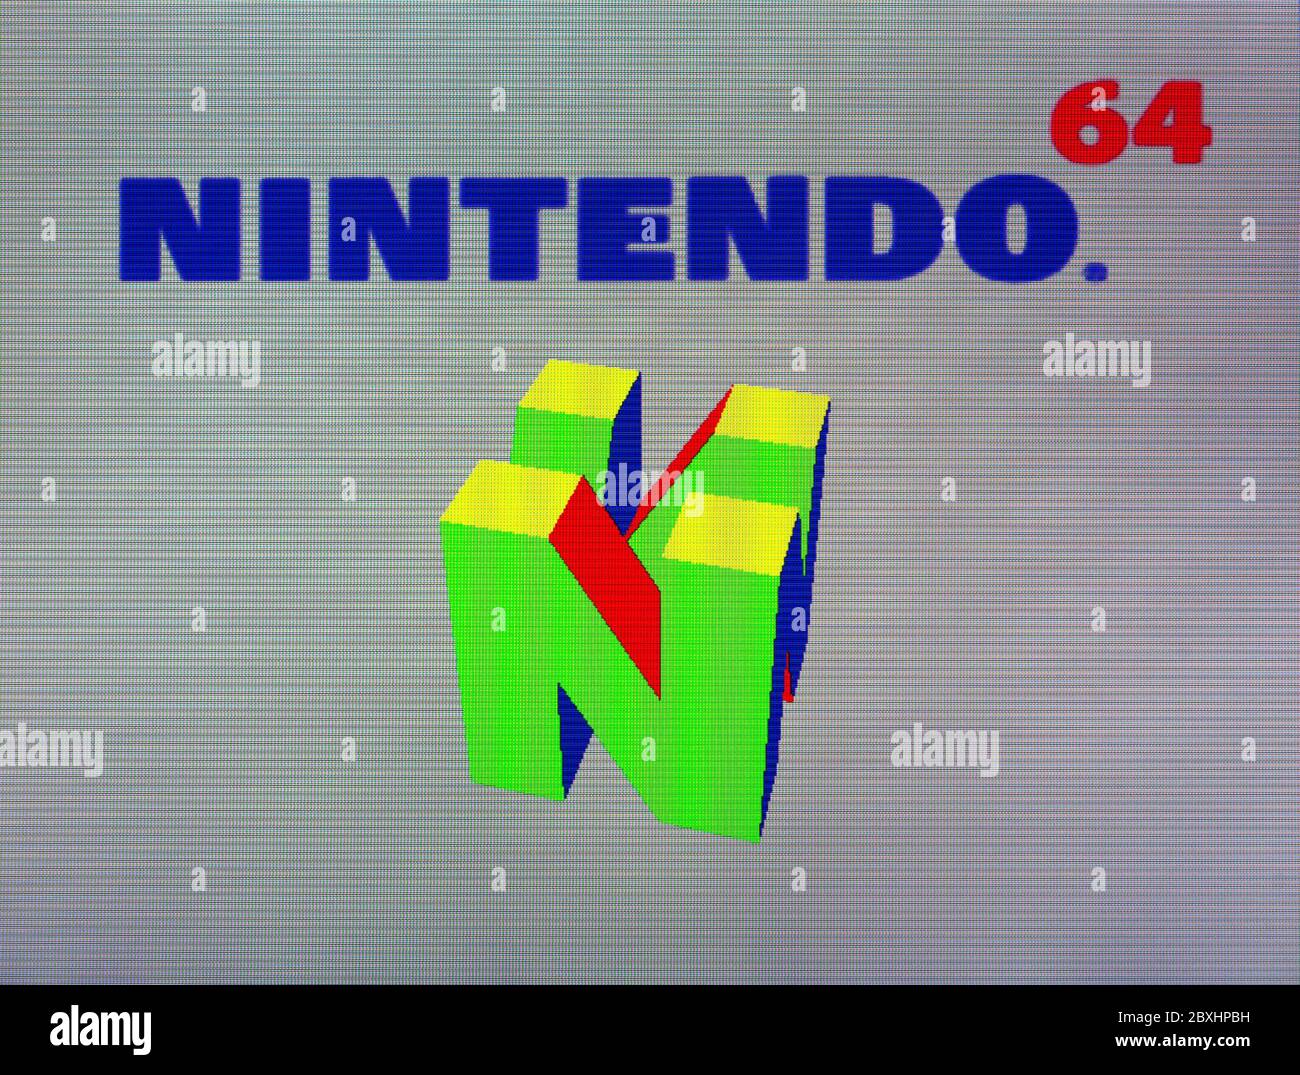 N64 3d Logo Nintendo 64 Videogame Editorial Use Only Stock Photo